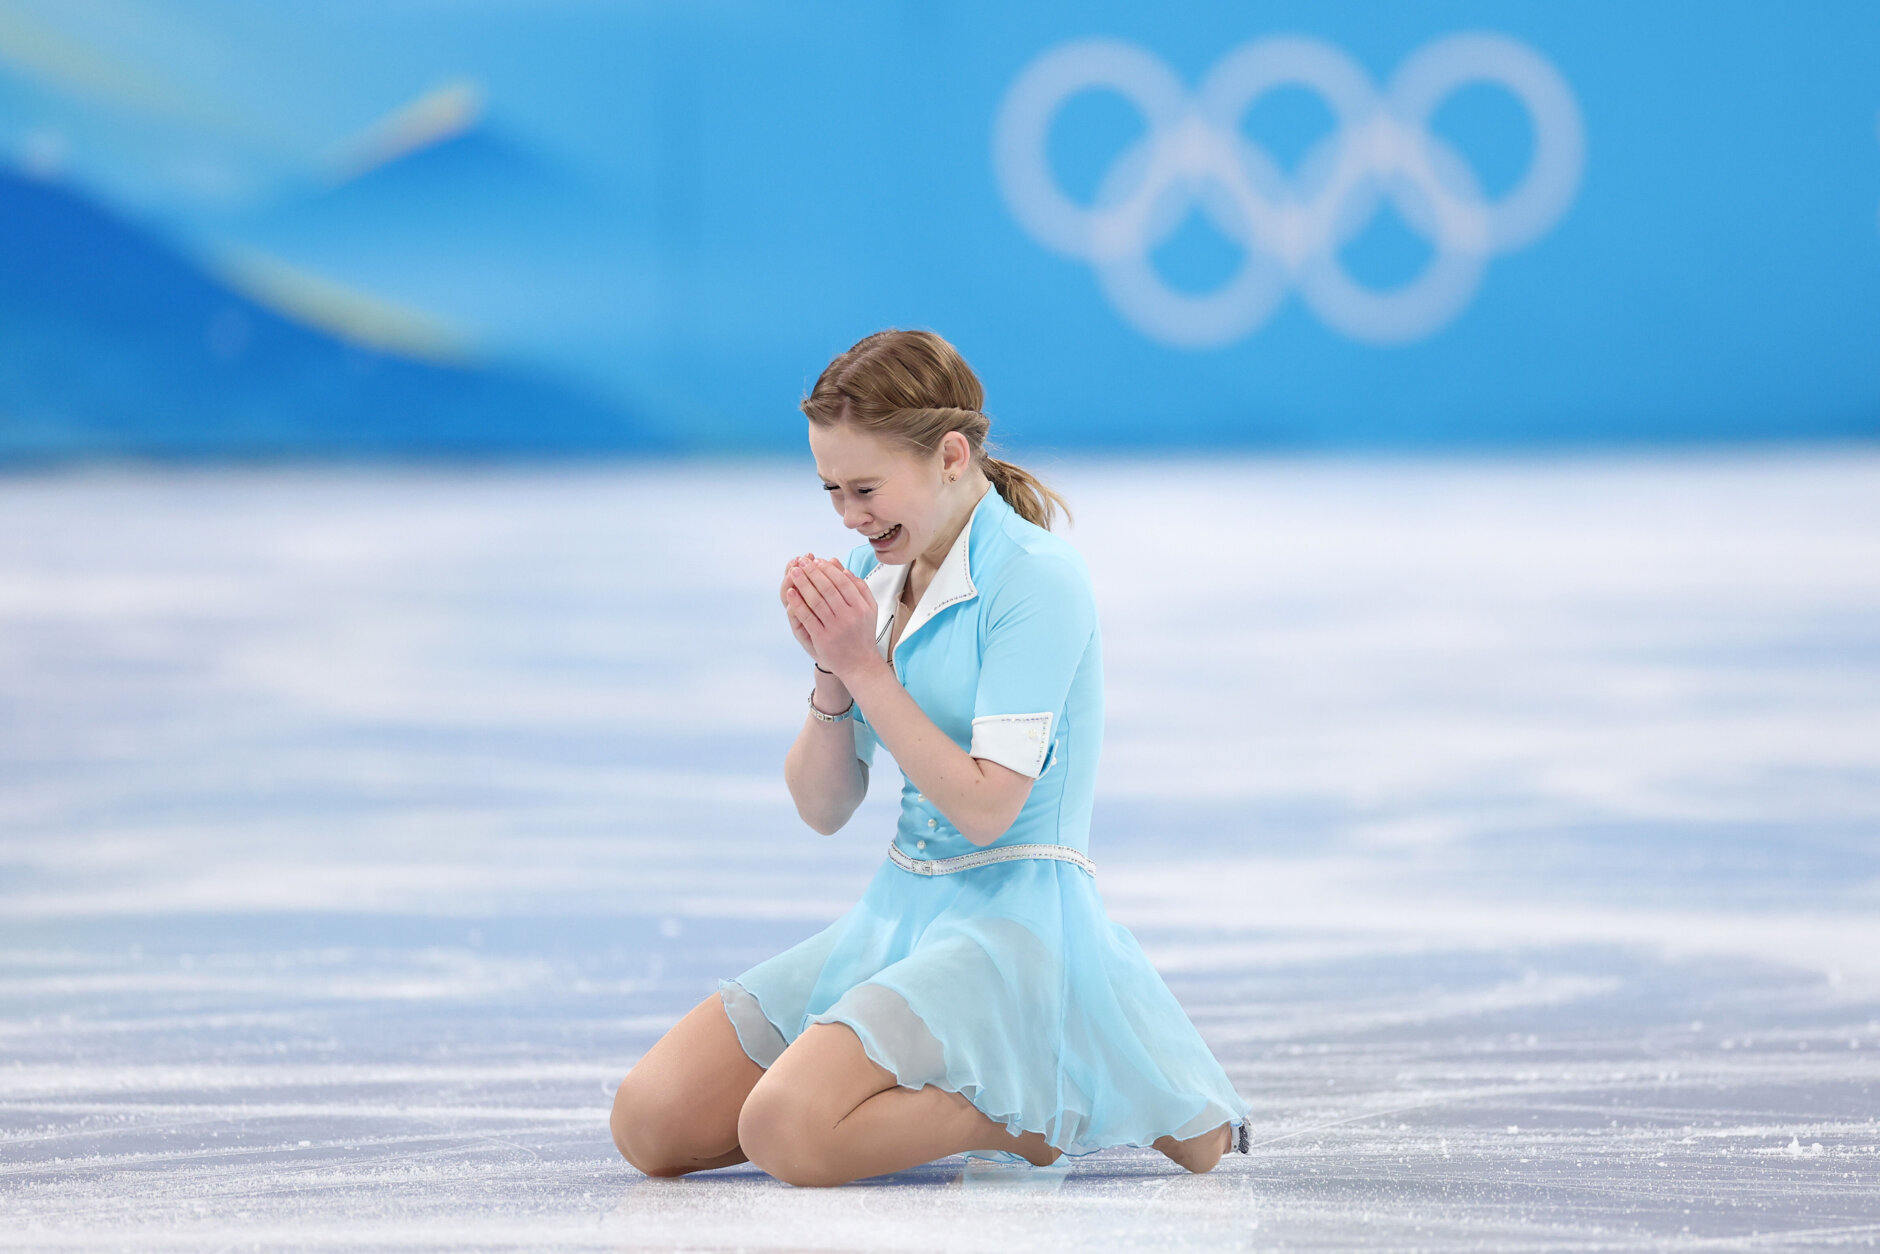 BEIJING, CHINA - FEBRUARY 17: Ekaterina Kurakova of Team Poland reacts after skating during the Women Single Skating Free Skating on day thirteen of the Beijing 2022 Winter Olympic Games at Capital Indoor Stadium on February 17, 2022 in Beijing, China. (Photo by Matthew Stockman/Getty Images)